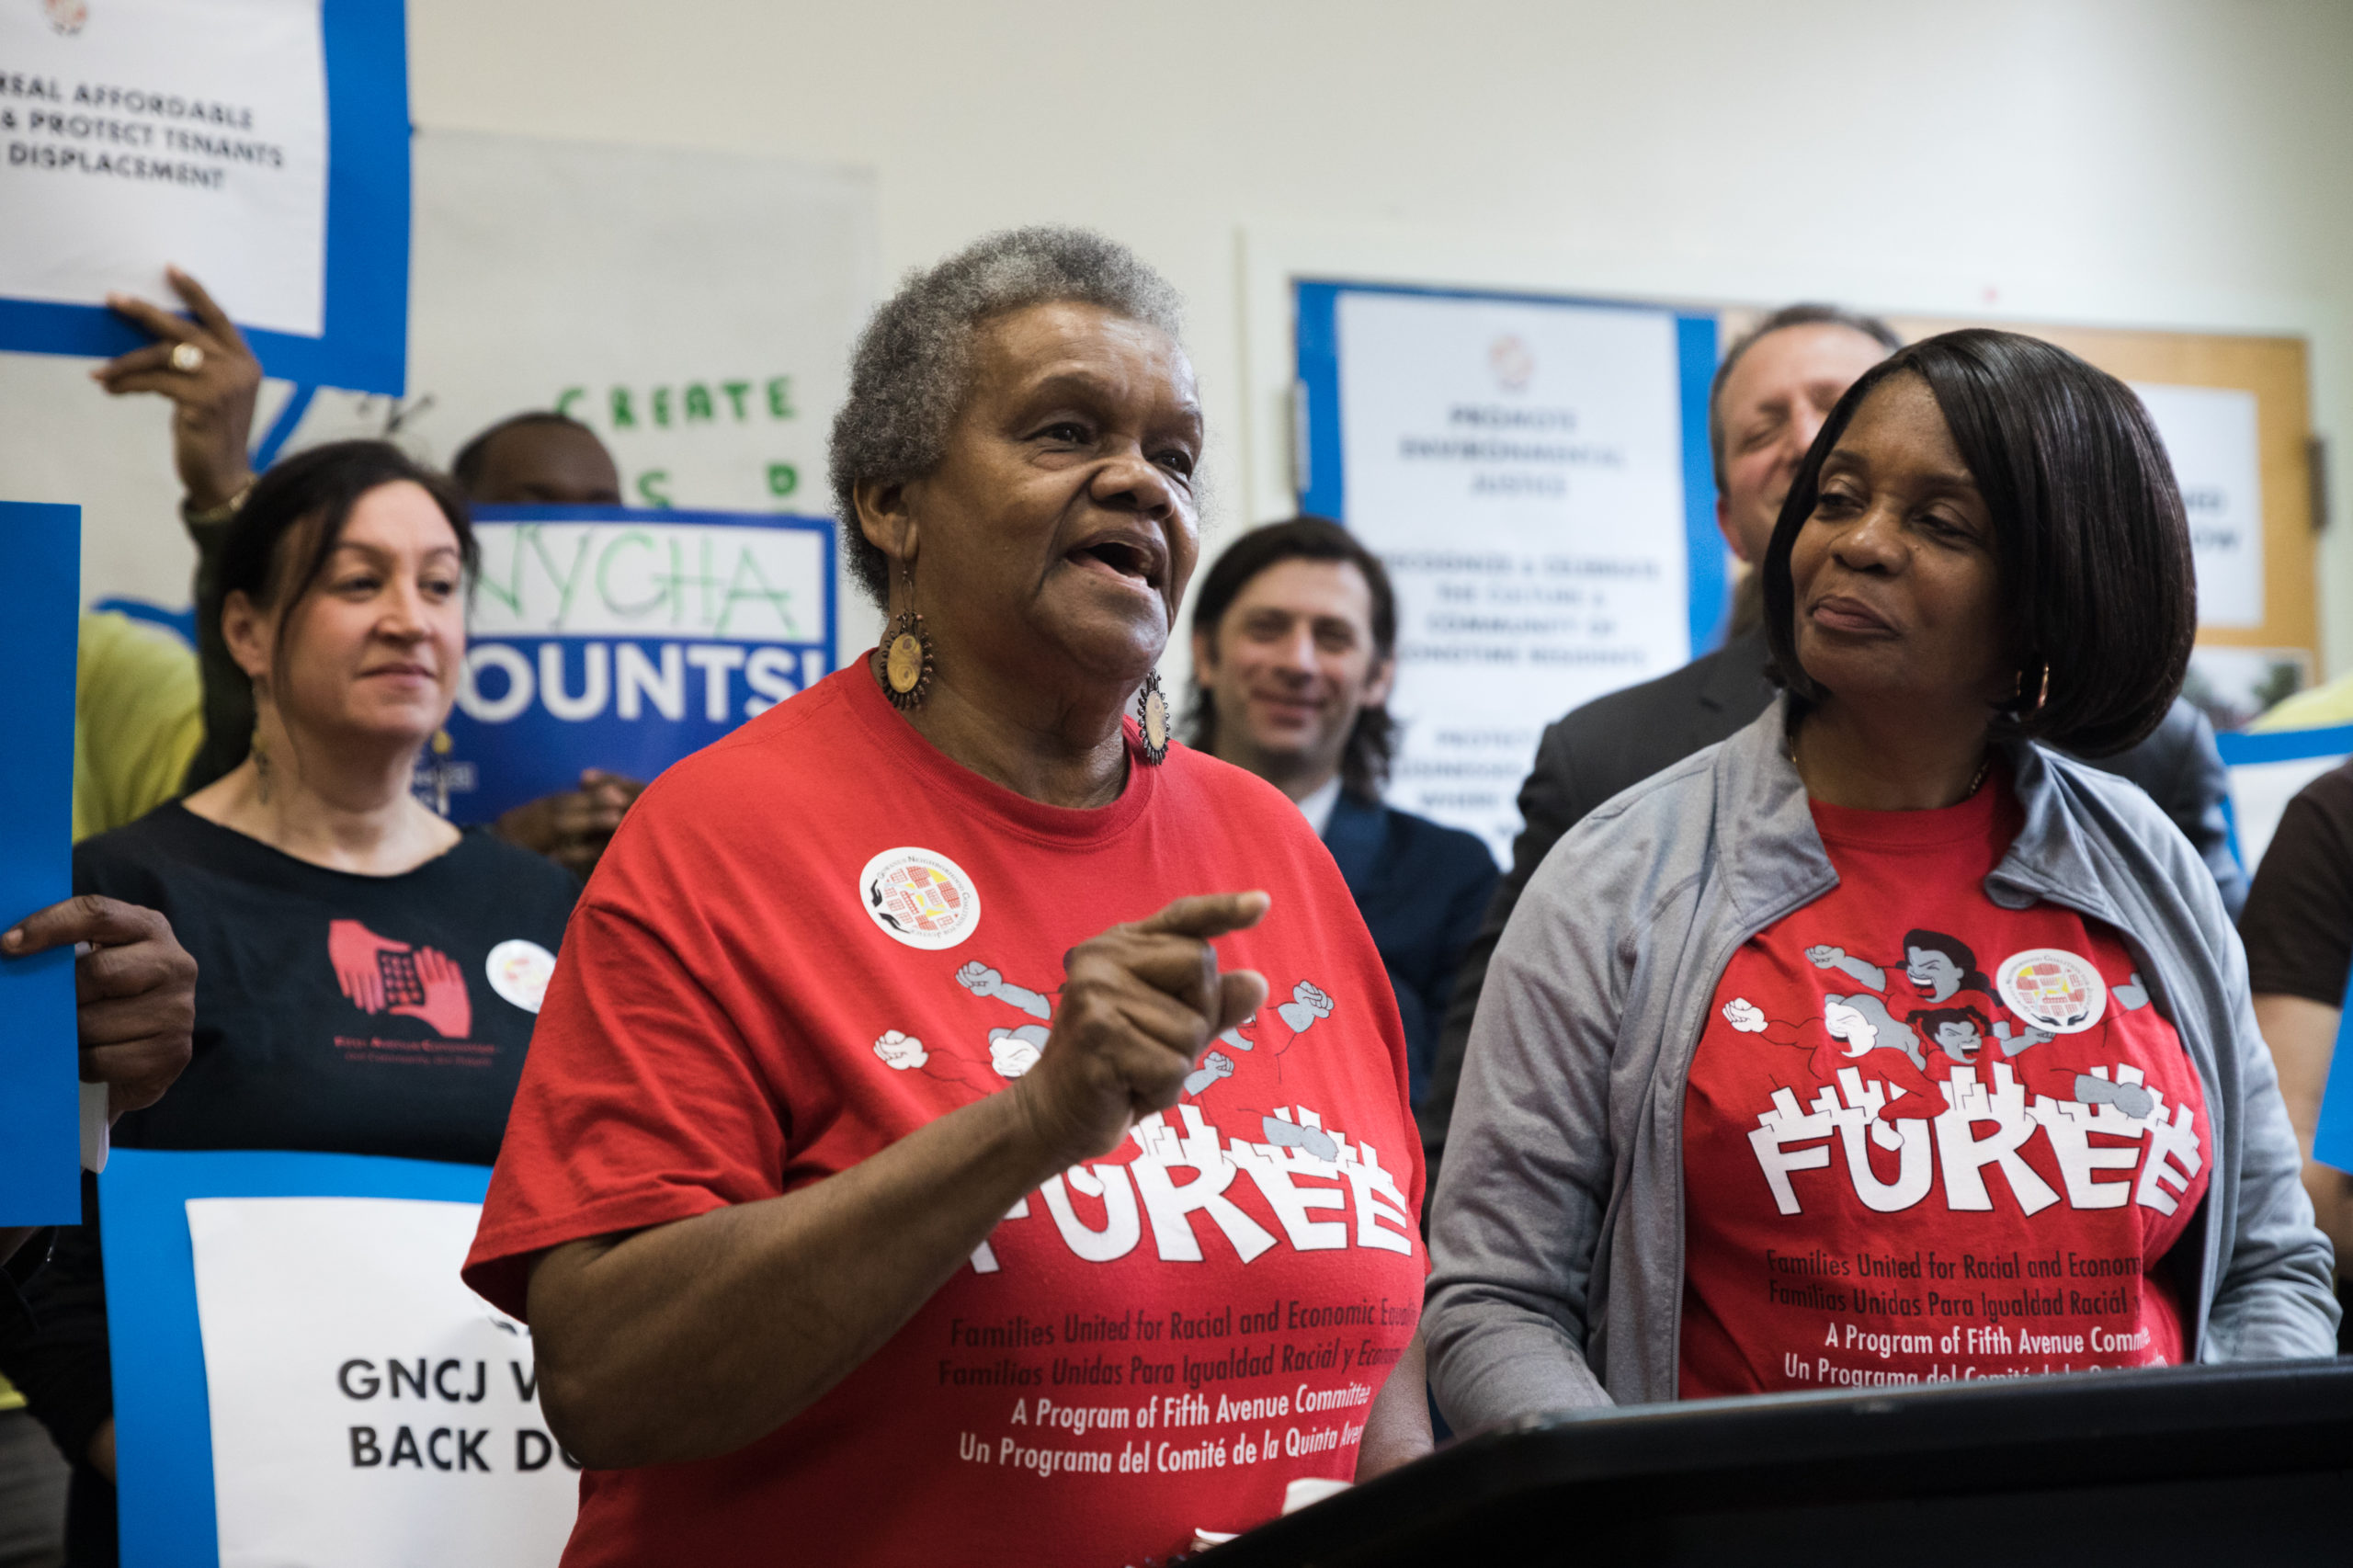 Residents of public housing in Gowanus expressed the need for upfront funding for full capital needs at the Warren, Wyckoff and Gowanus Houses if the neighborhood rezoning goes through. Photo: Paul Frangipane/Brooklyn Eagle